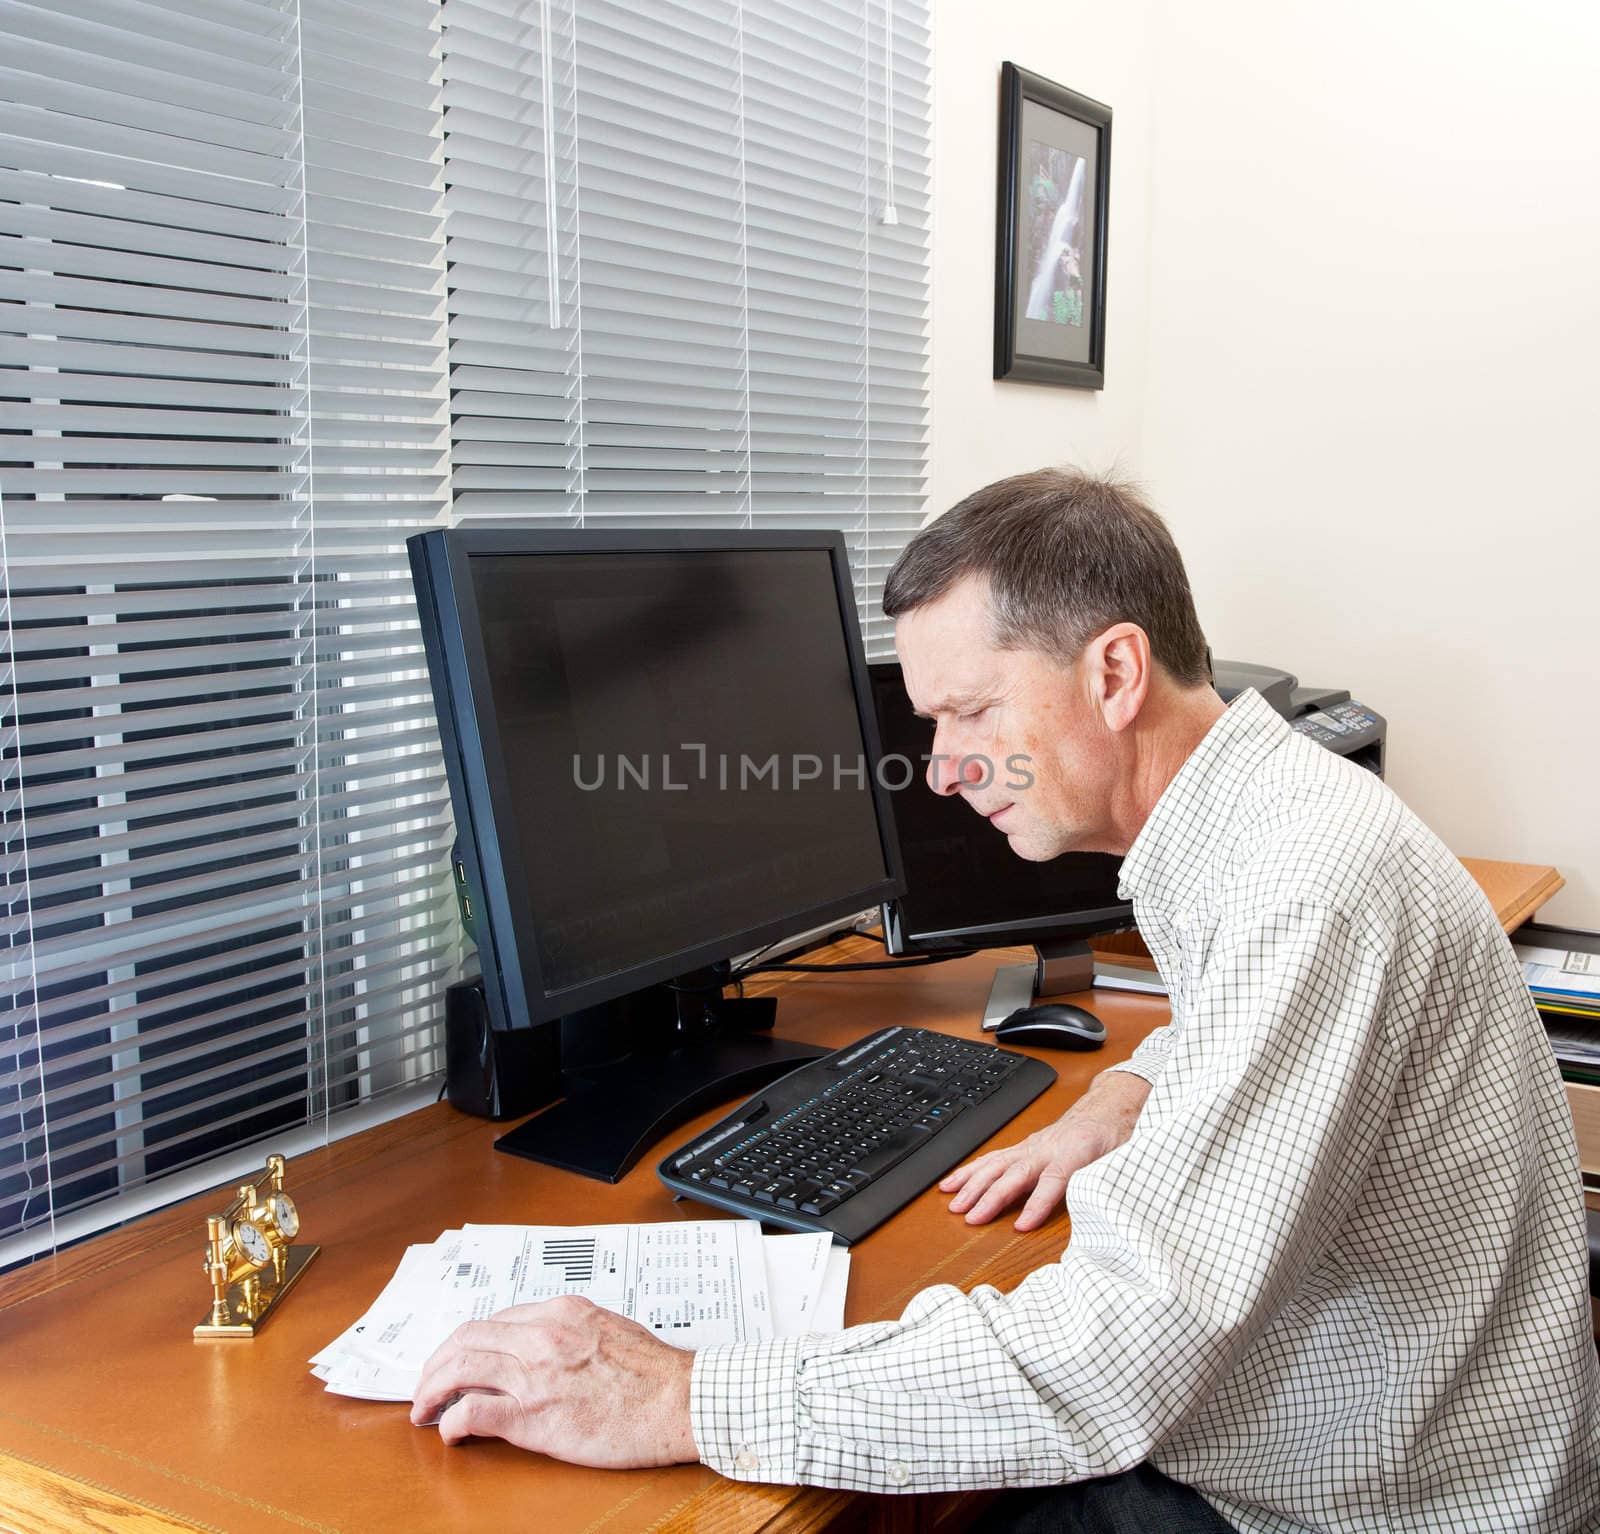 Senior executive in home office with two monitors and keyboard on leather desk and looking at paperwork on desk